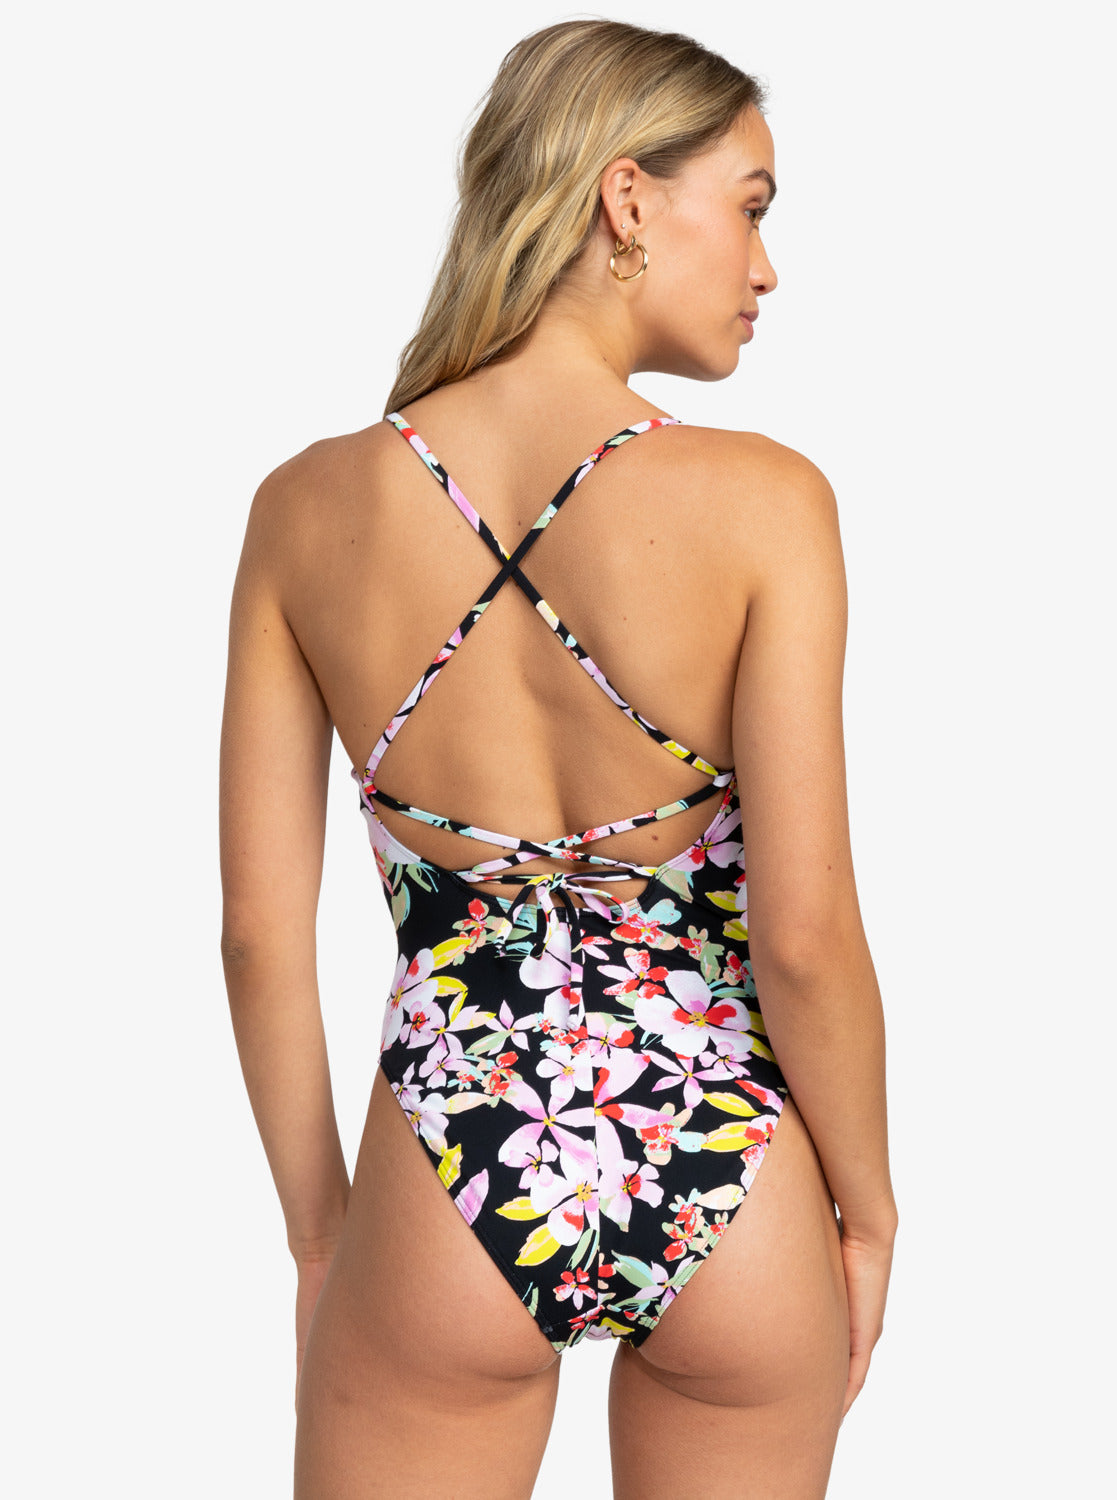 Roxy Beach Classics One Piece Swimwear in anthracite new life colourway on model from rear